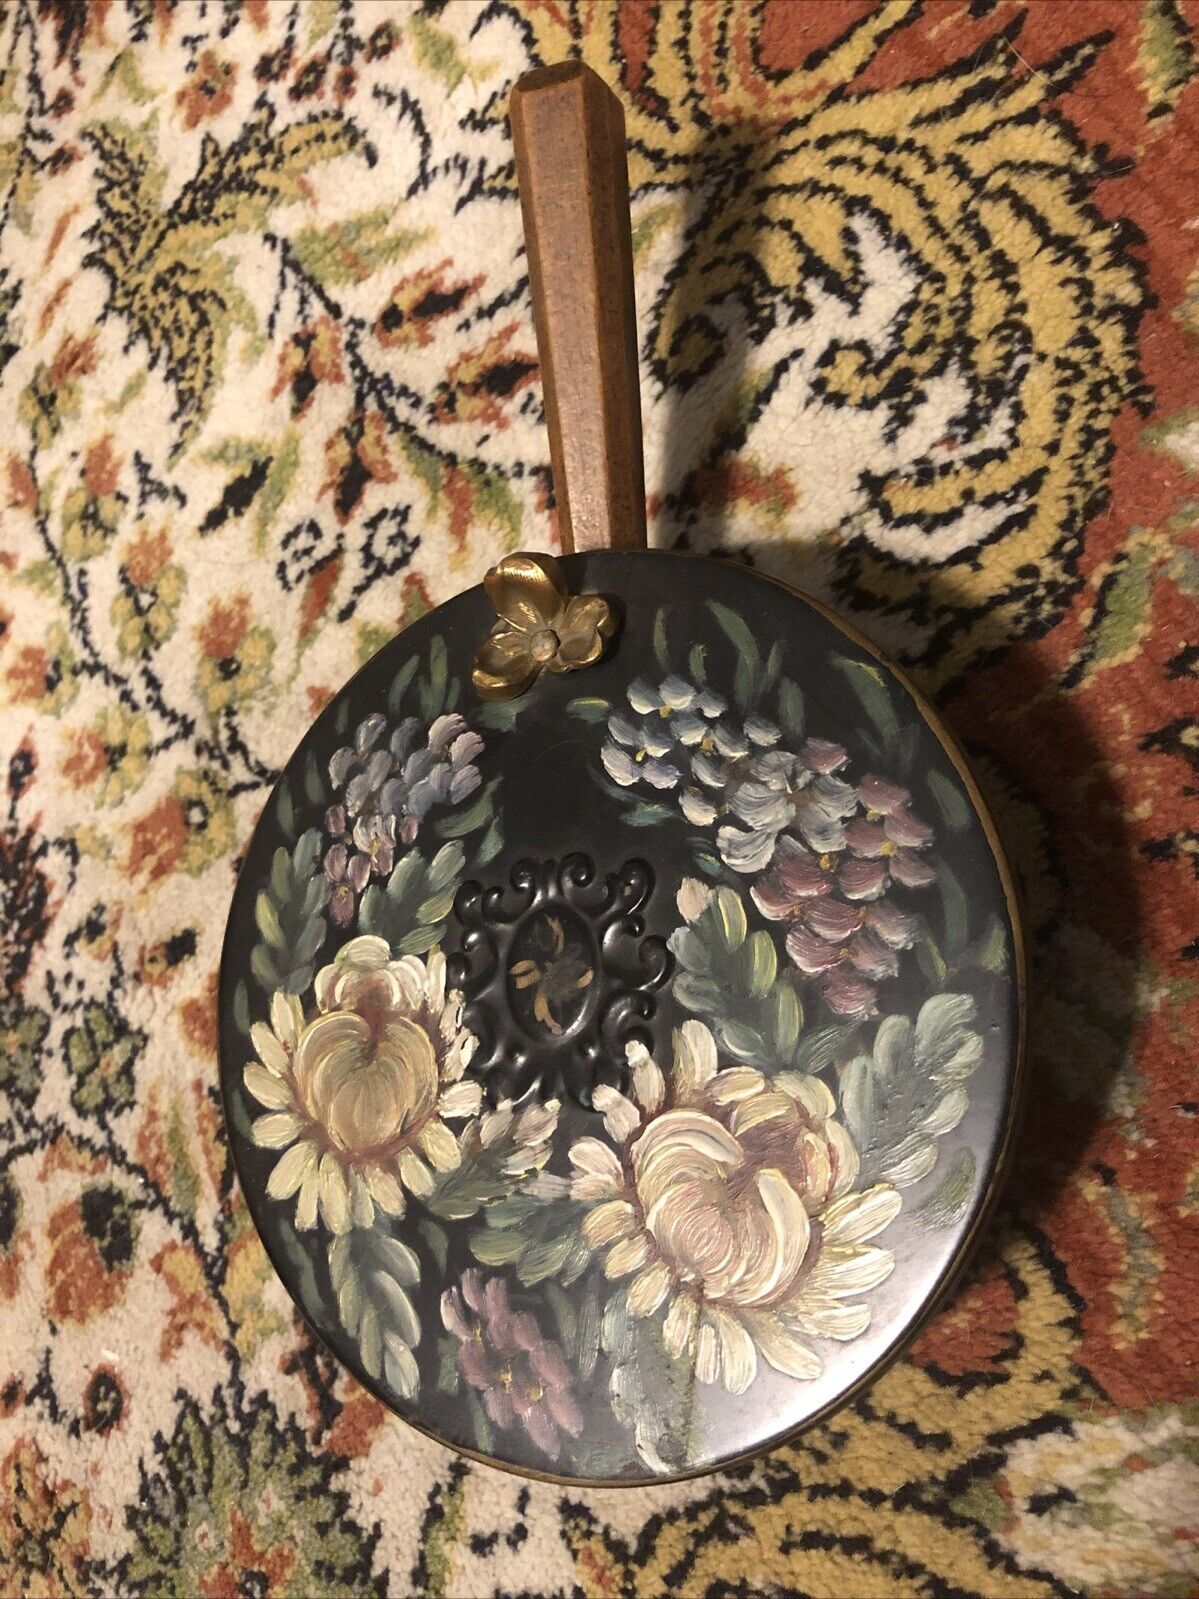 Vintage Floral Hand Painted Crumb Catcher For Warming With Hot Coals